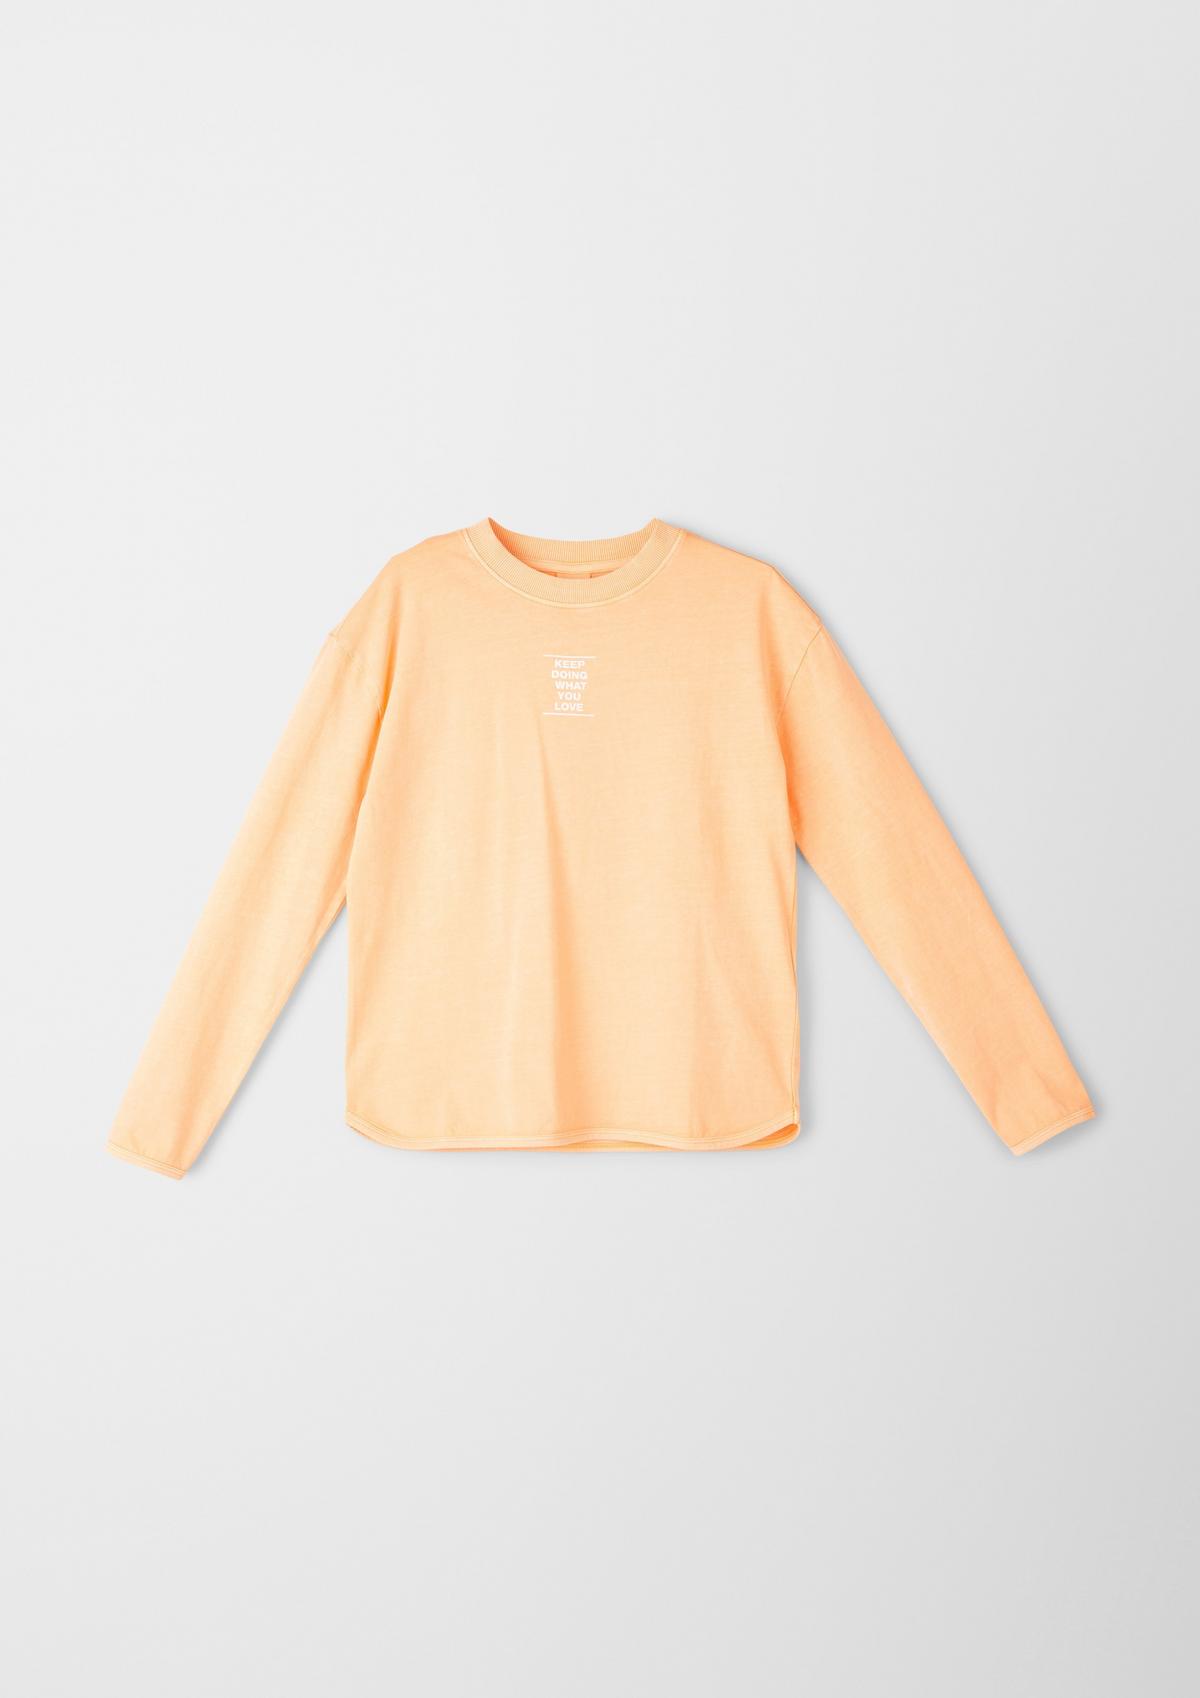 s.Oliver Long sleeve top with printed lettering